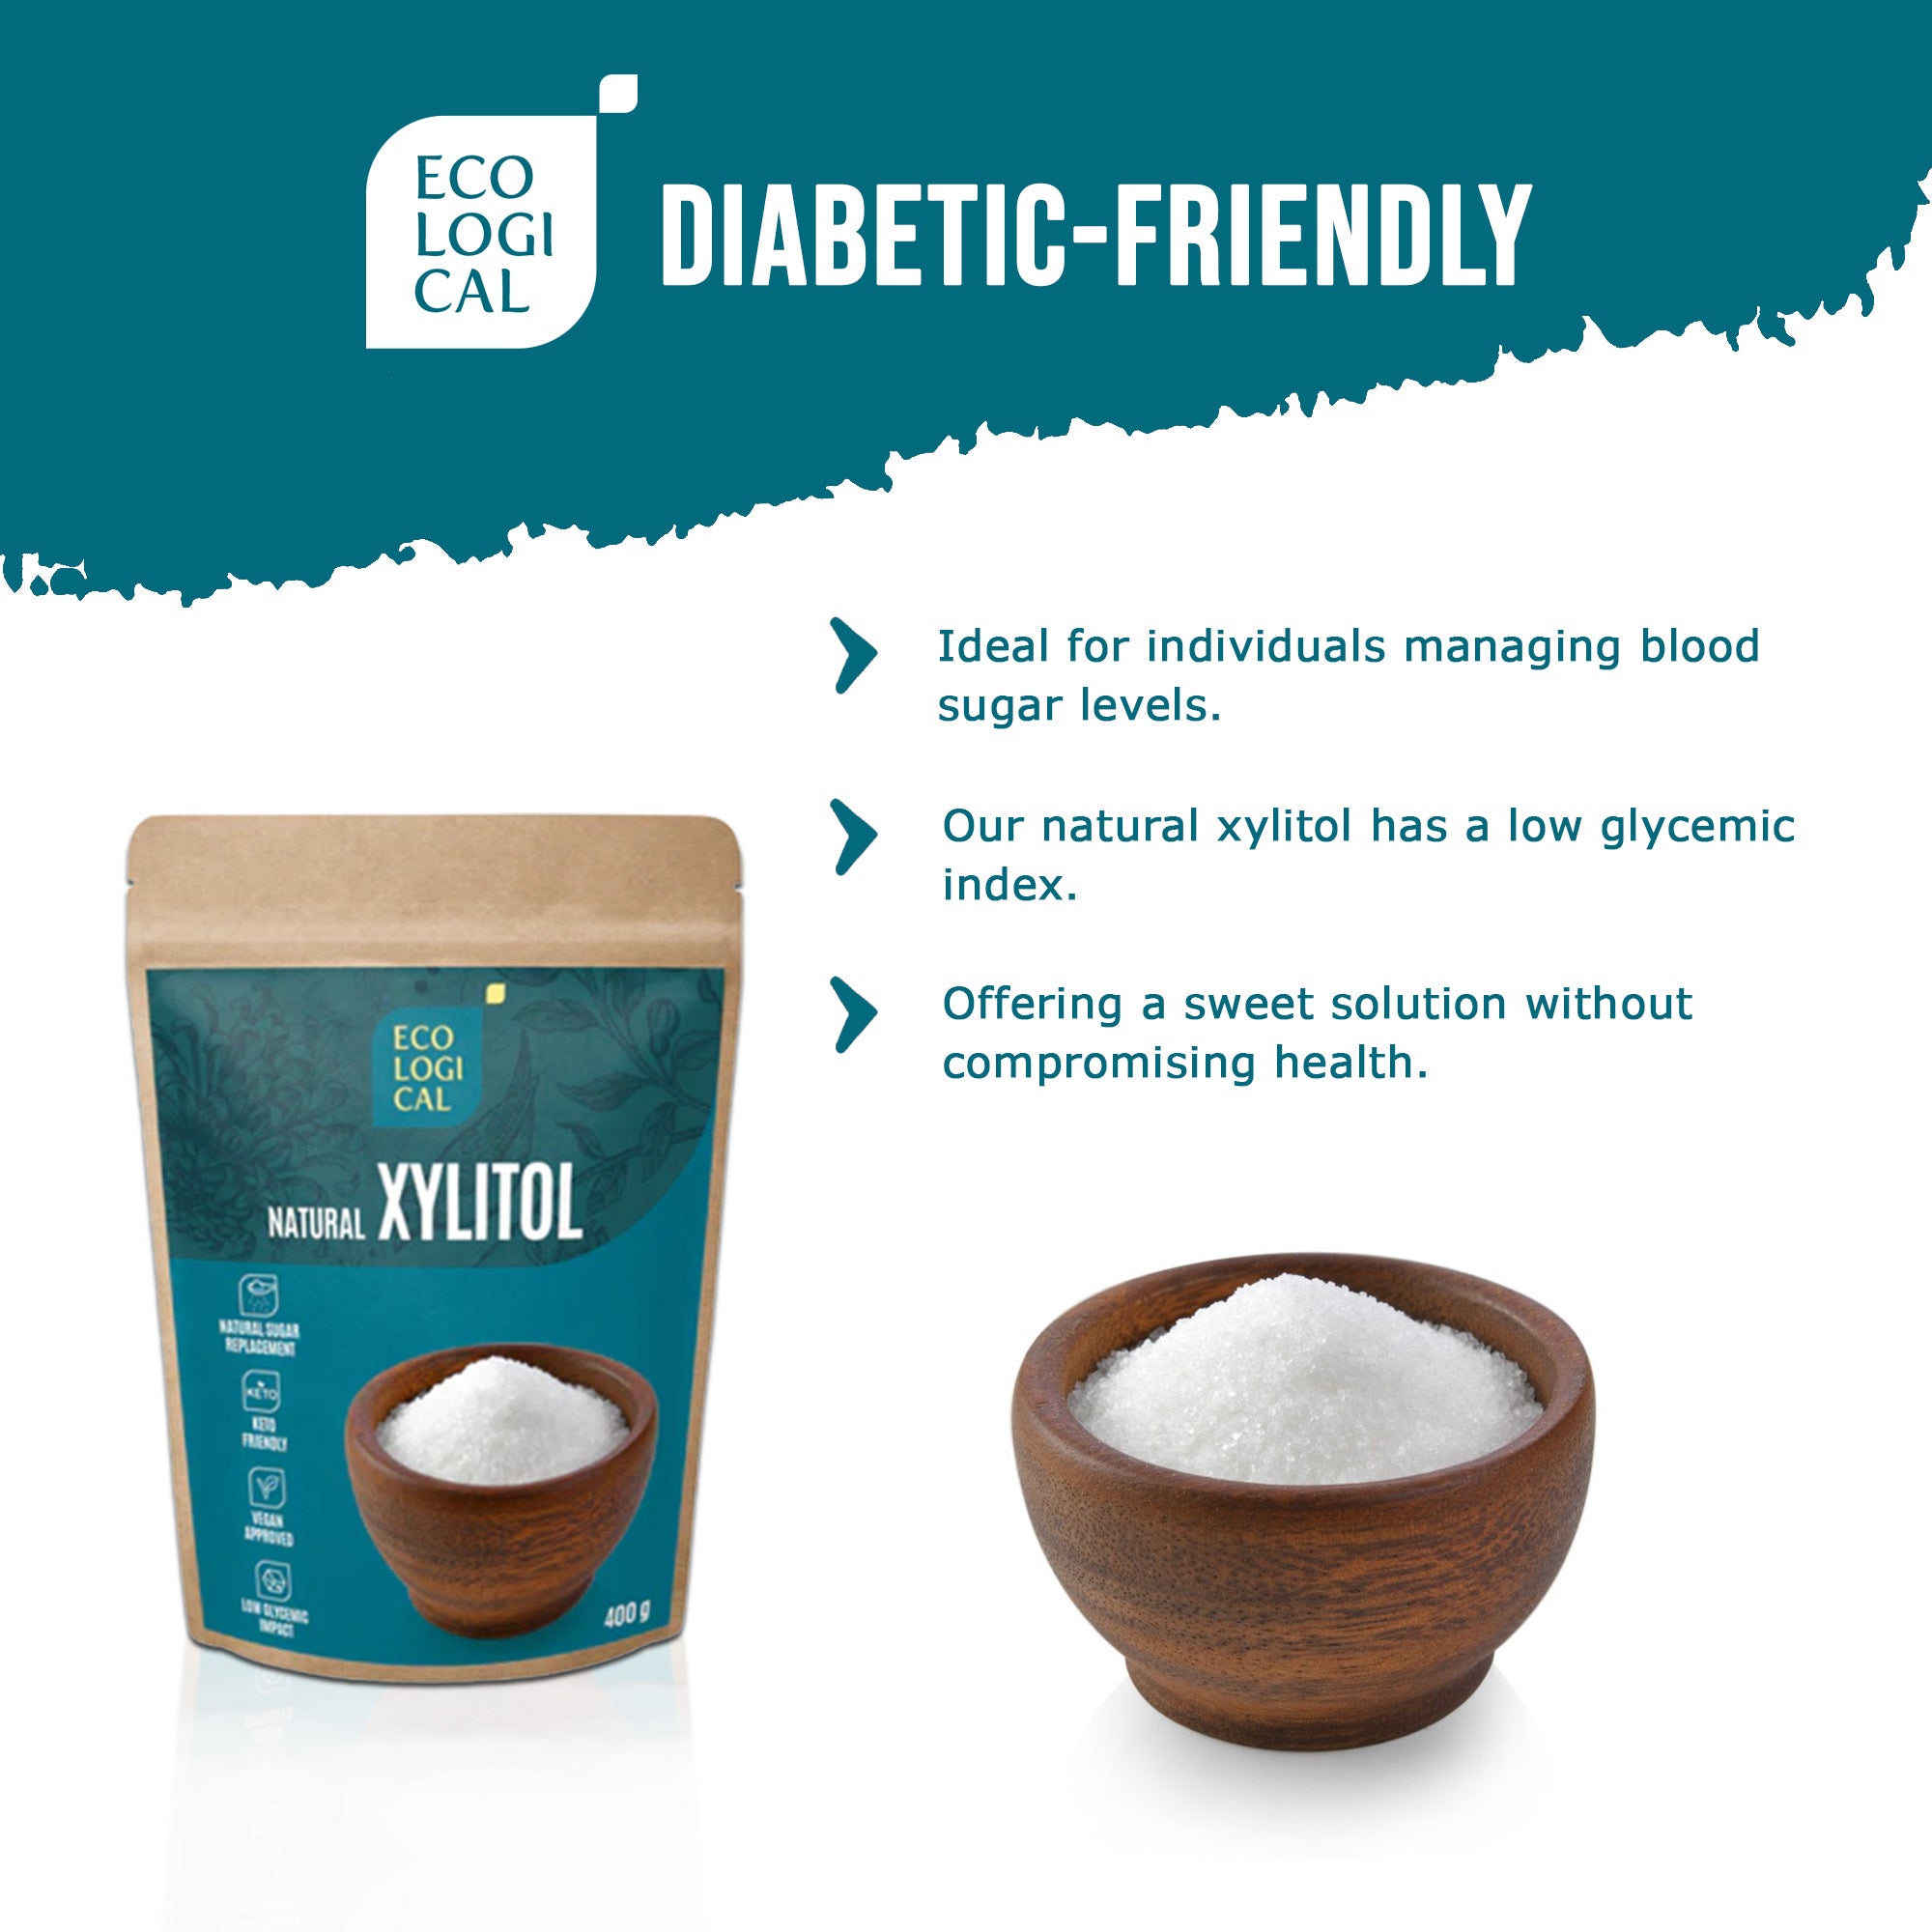 Premium ECOLOGICAL Natural Xylitol, 400g - Sugar Substitute for Healthy and Sustainable Living